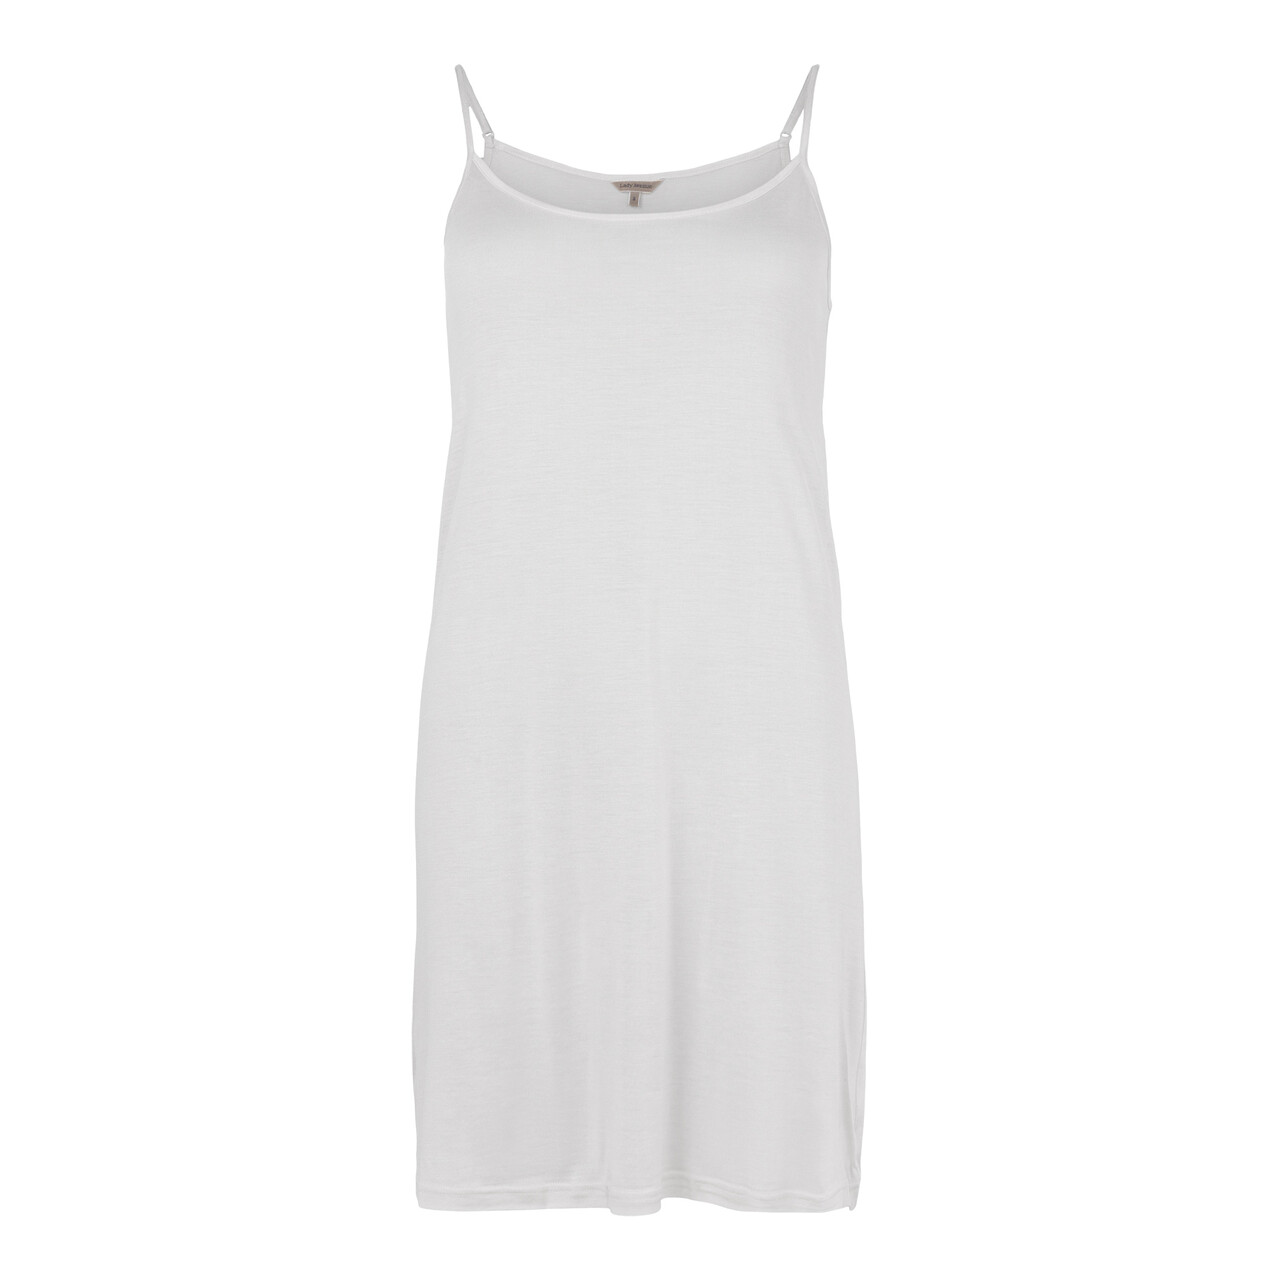 LADY AVENUE SILK JERSEY CHEMISE 23-20424 00 (Off White, M)